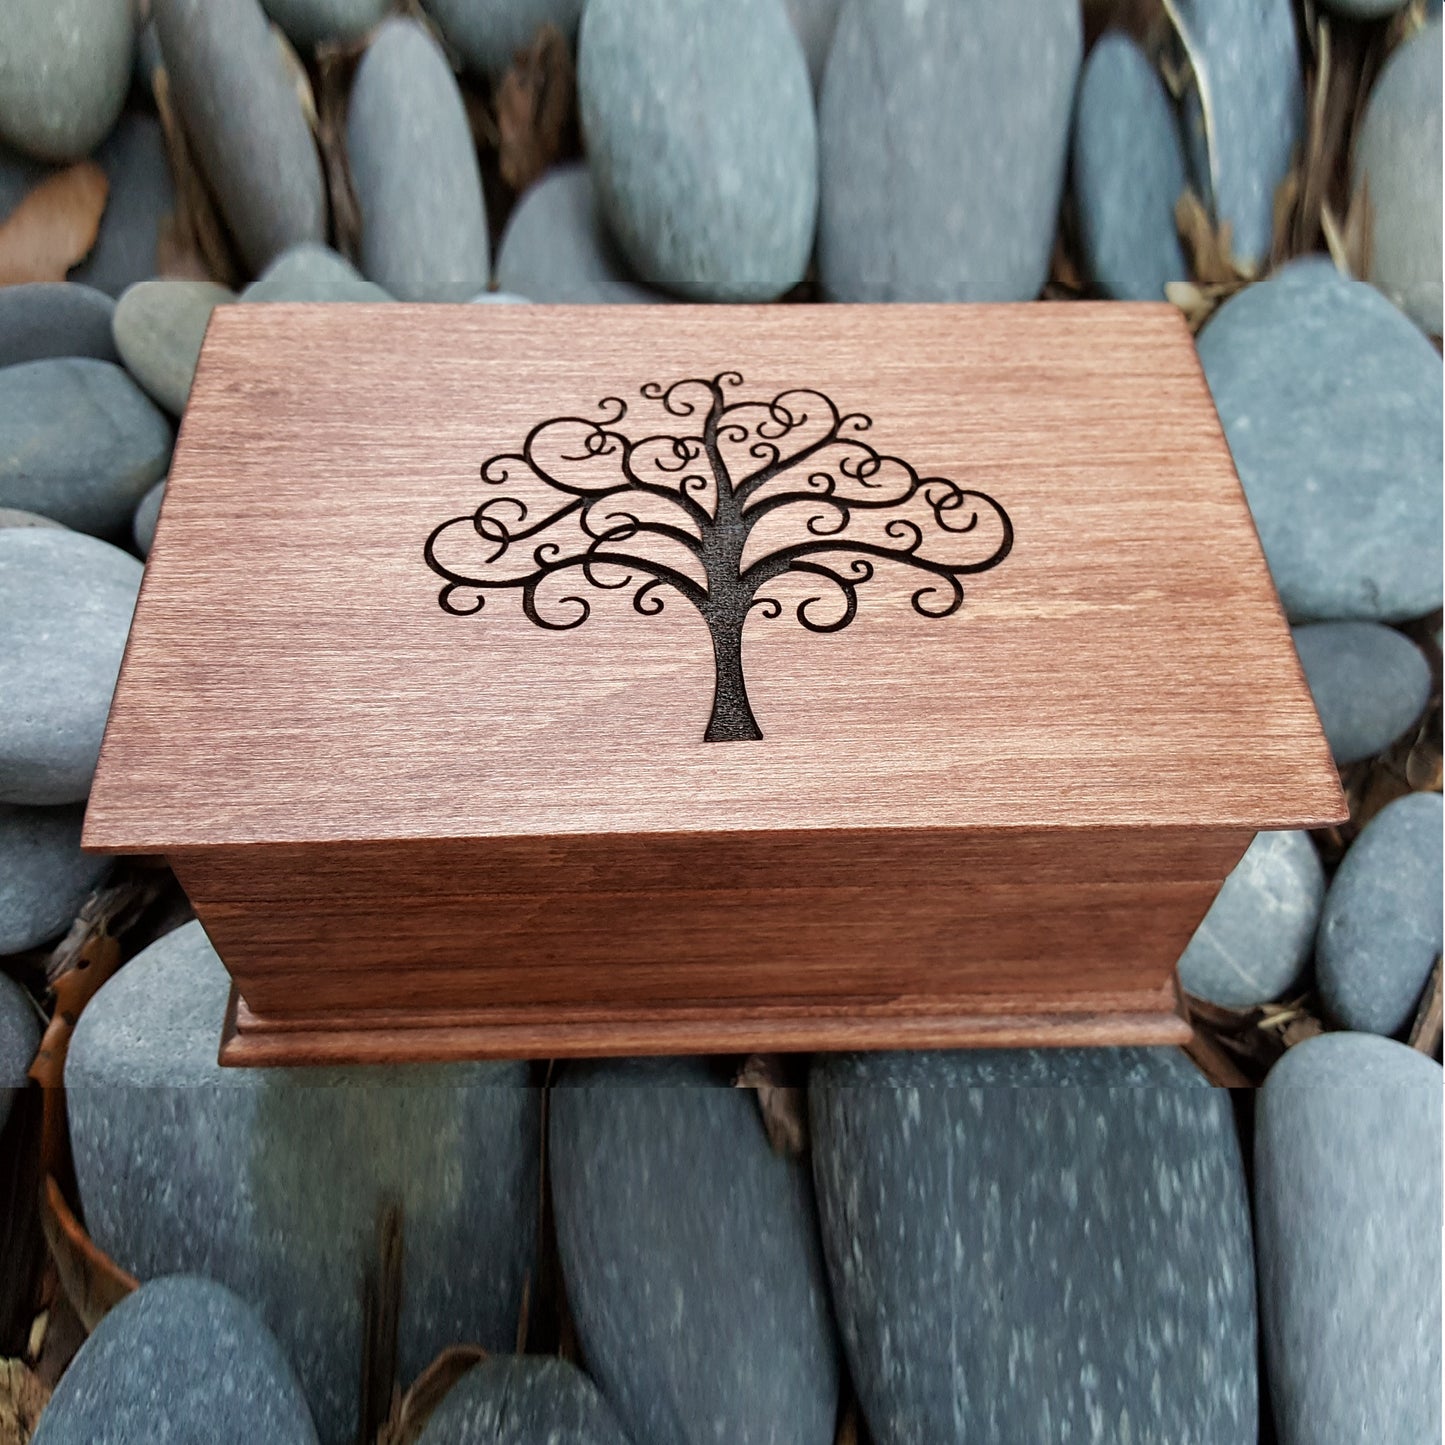 Tree of life engraved jewelry box with built in wind up music player, choose color and song